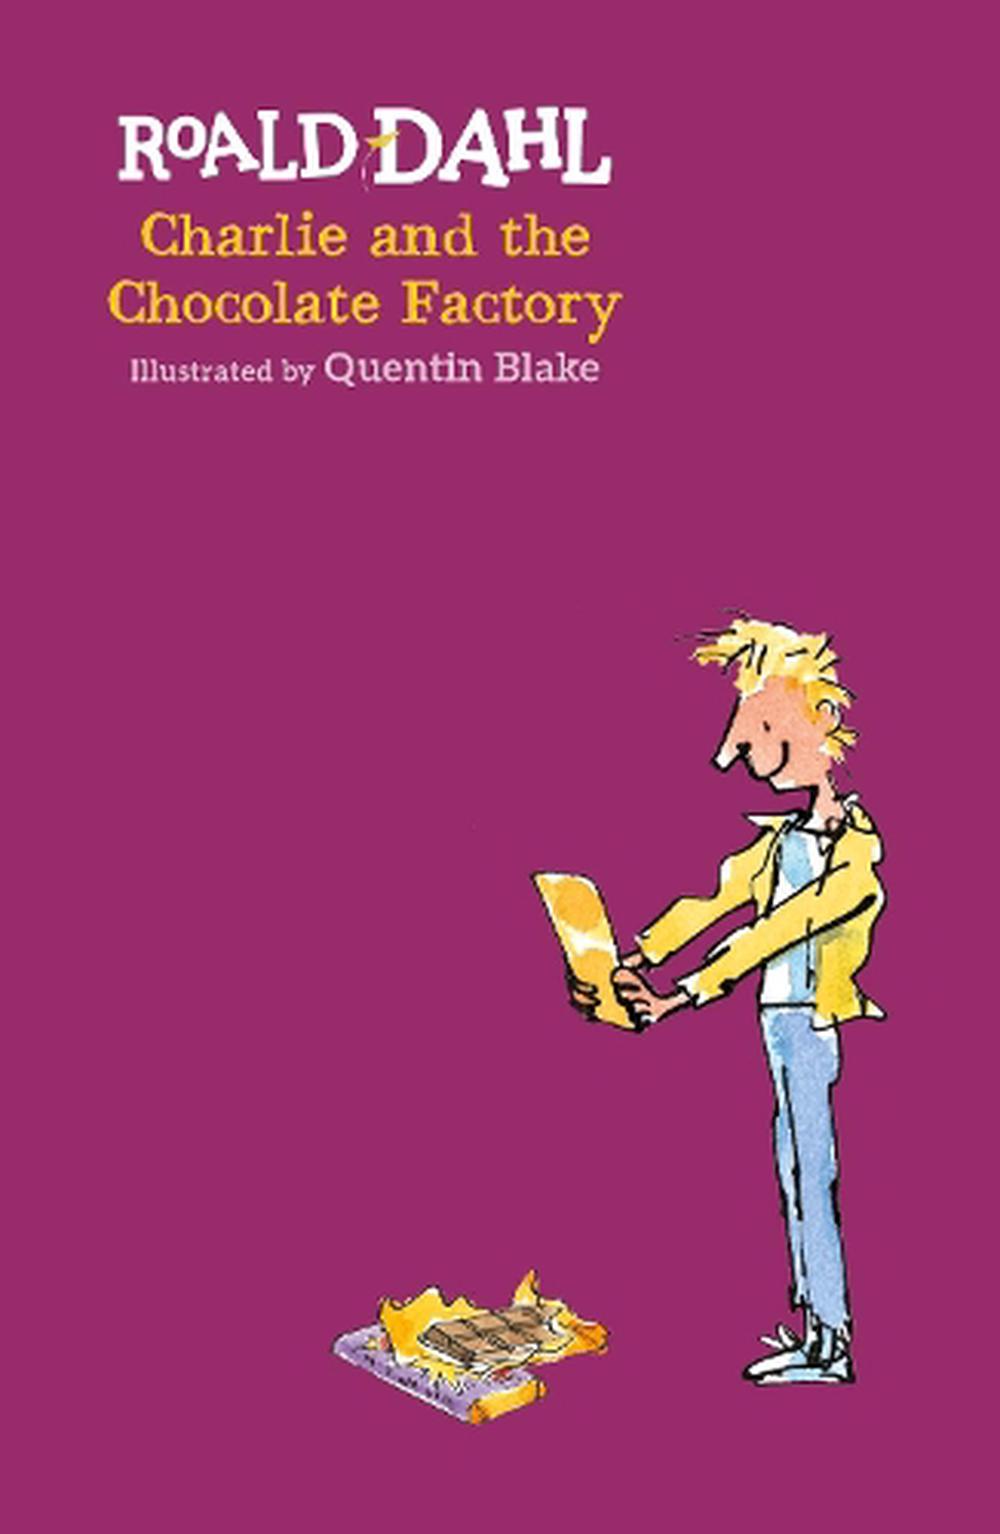 charlie and the chocolate factory book pages